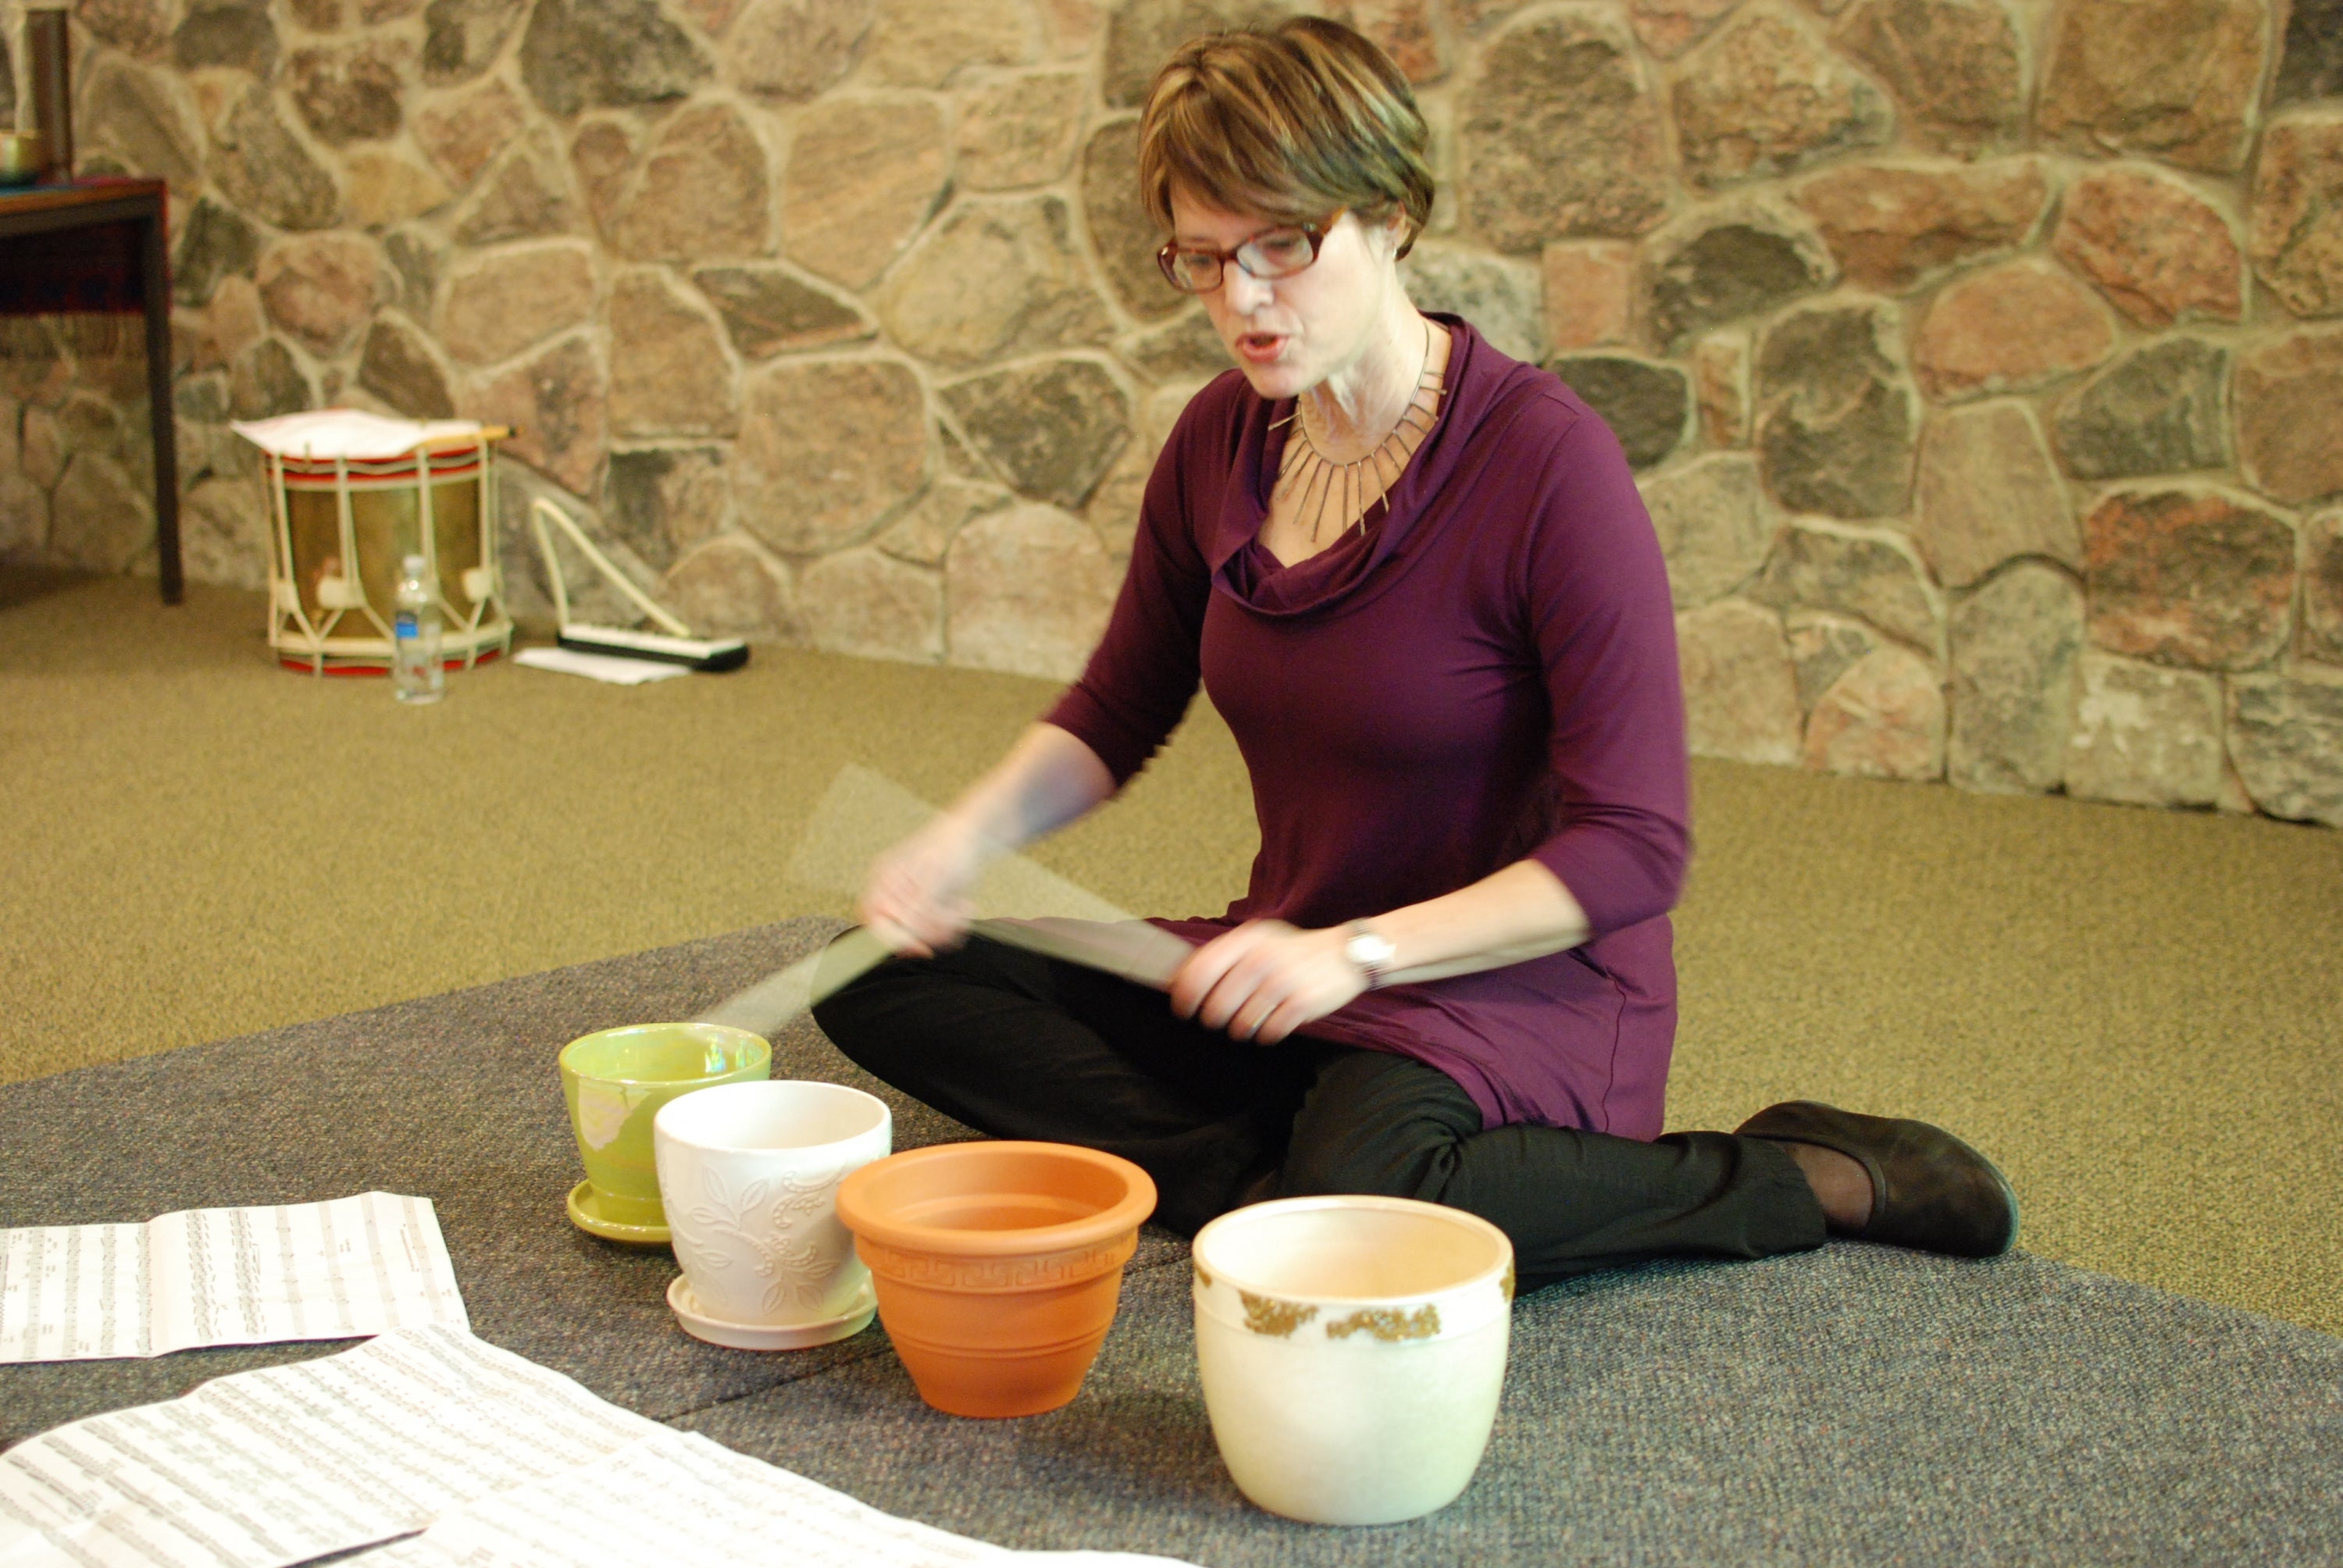 woman playing flower pots as percussion instrrument